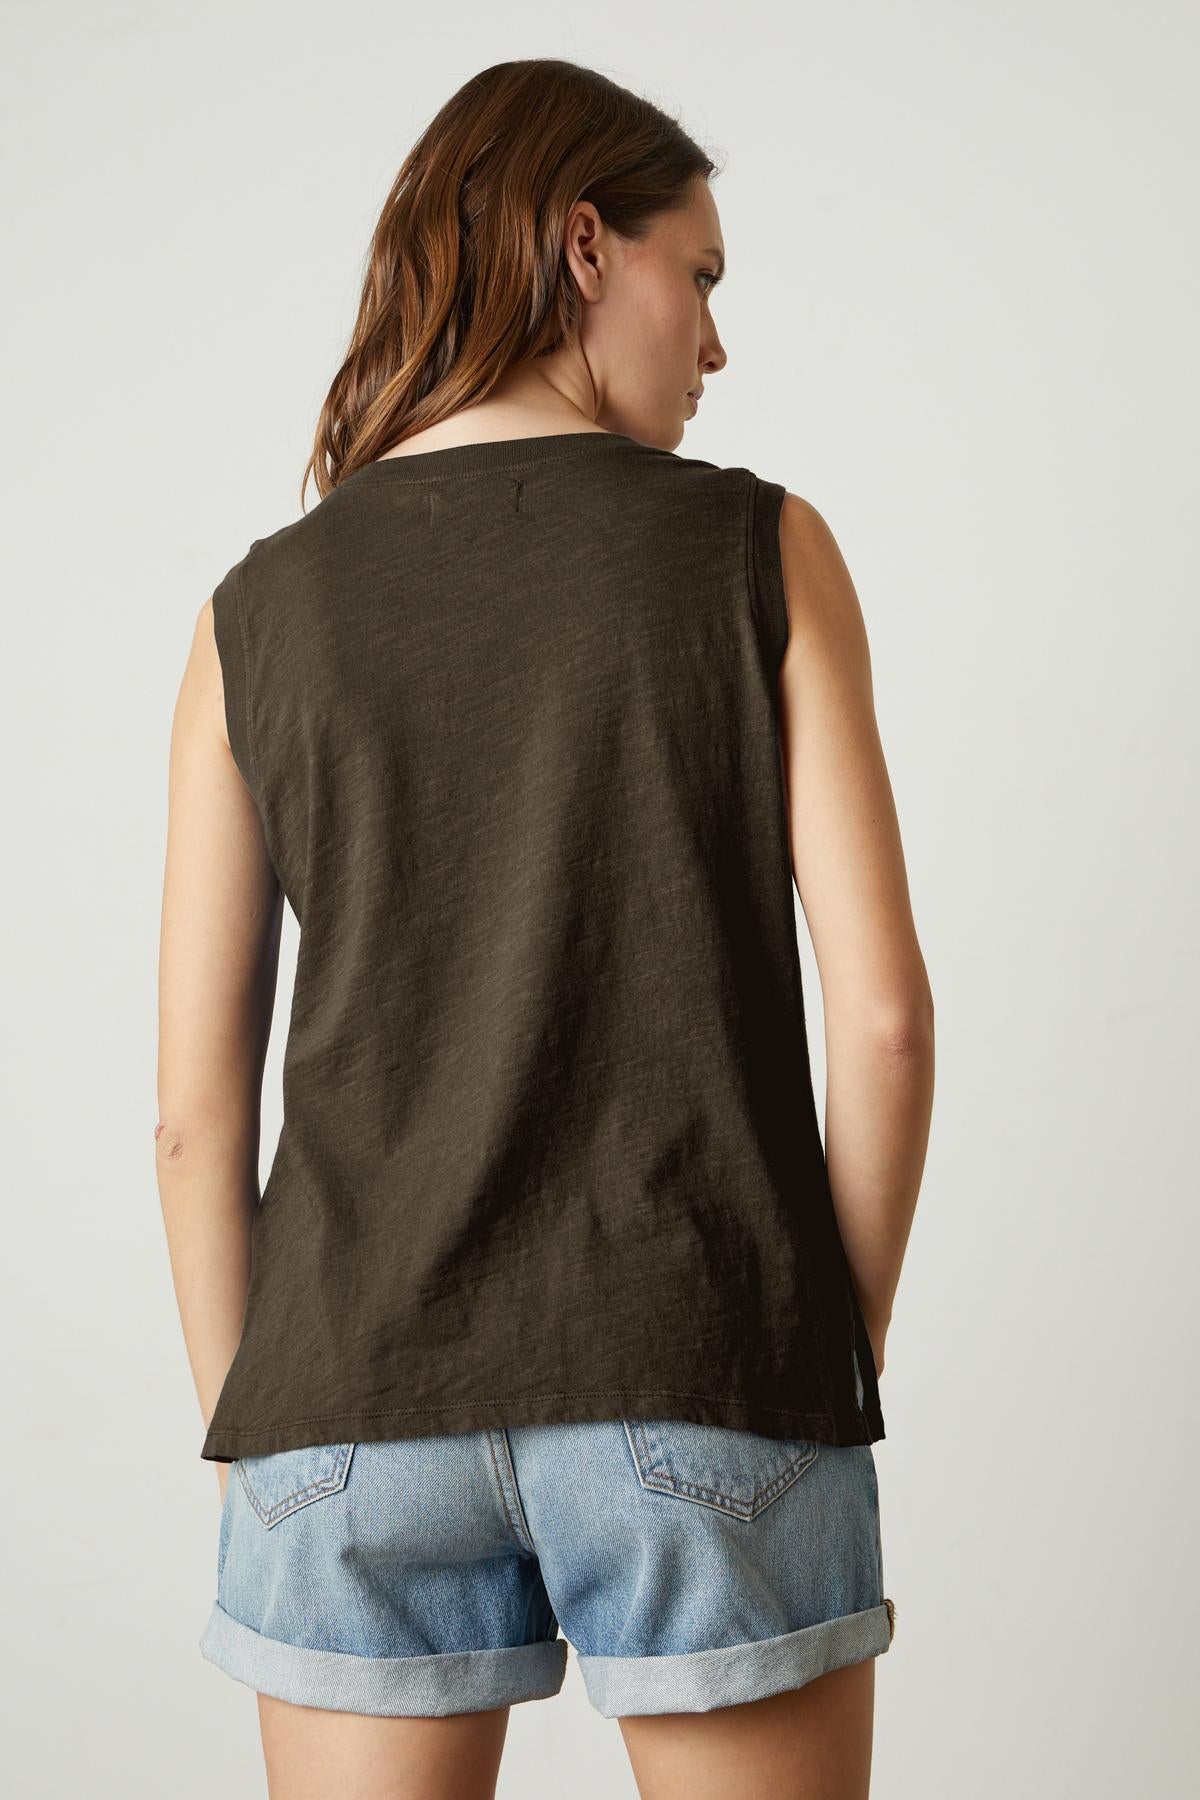   The back view of a woman wearing a Velvet by Graham & Spencer ELLEN VINTAGE SLUB TANK TOP and denim shorts. 